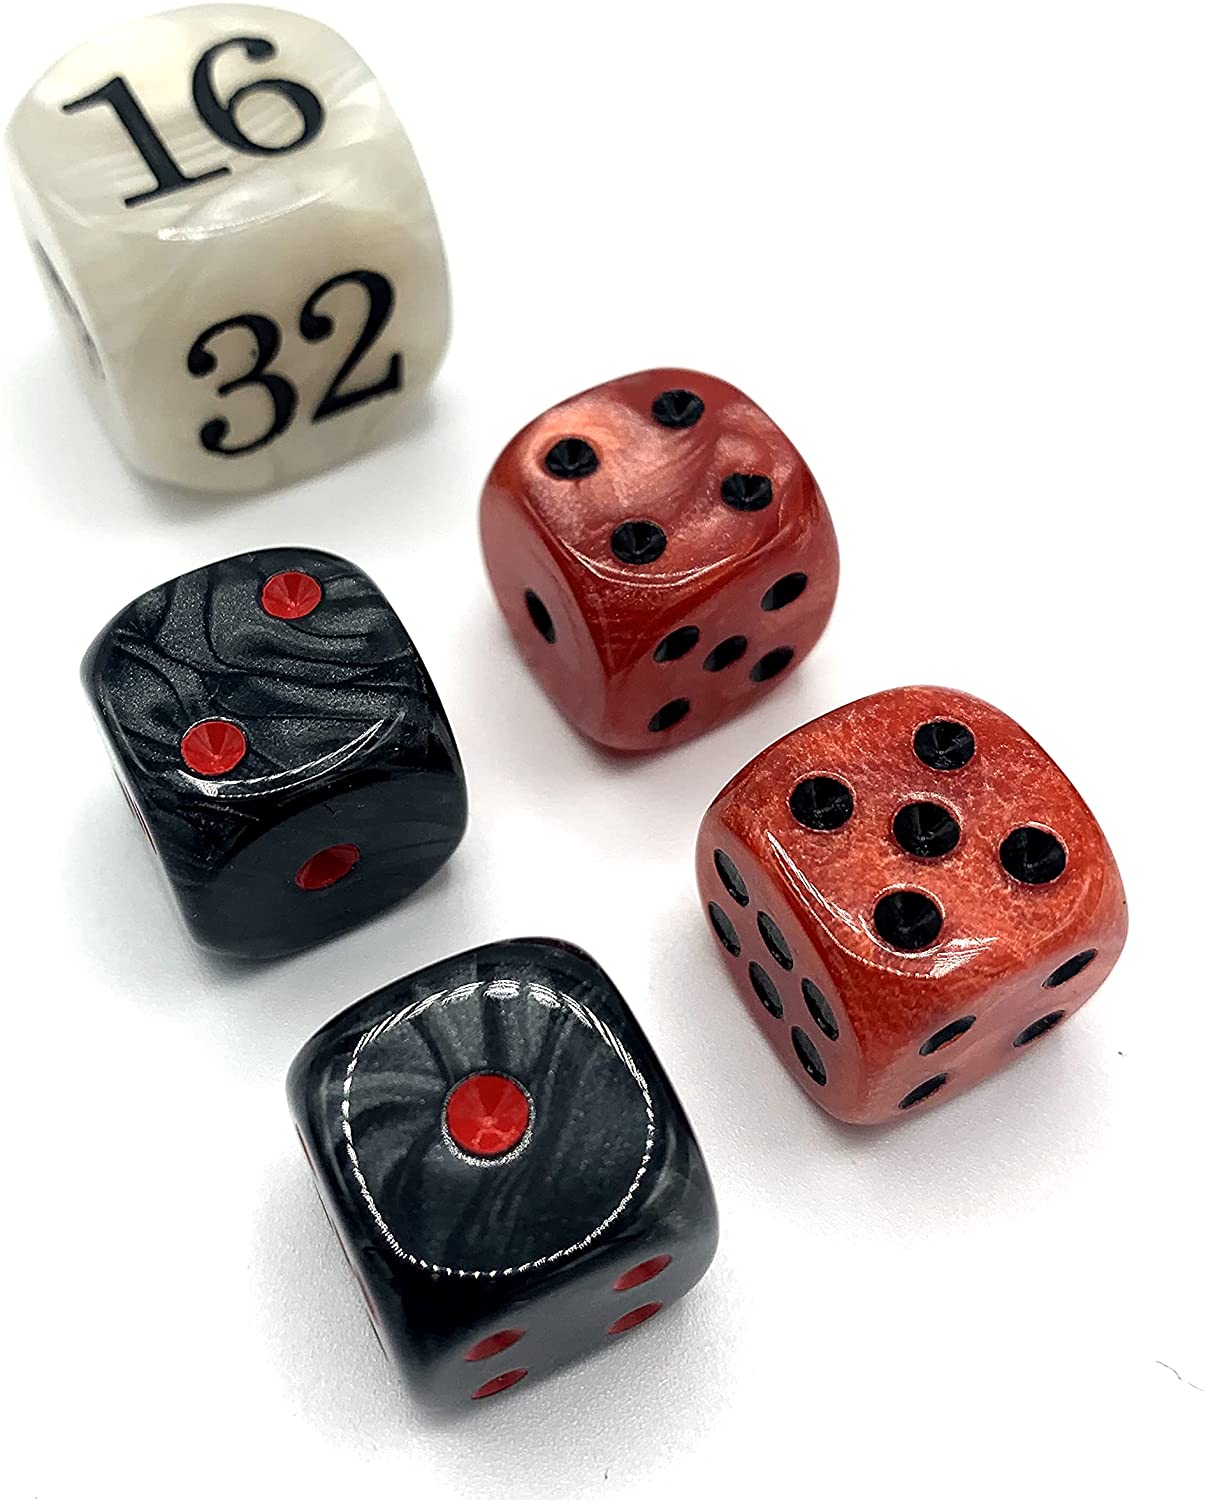 DOUBLING DICE,GAMES DICES,DOUBLING CUBES 22mm BACKGAMMON DICES SET DICE 